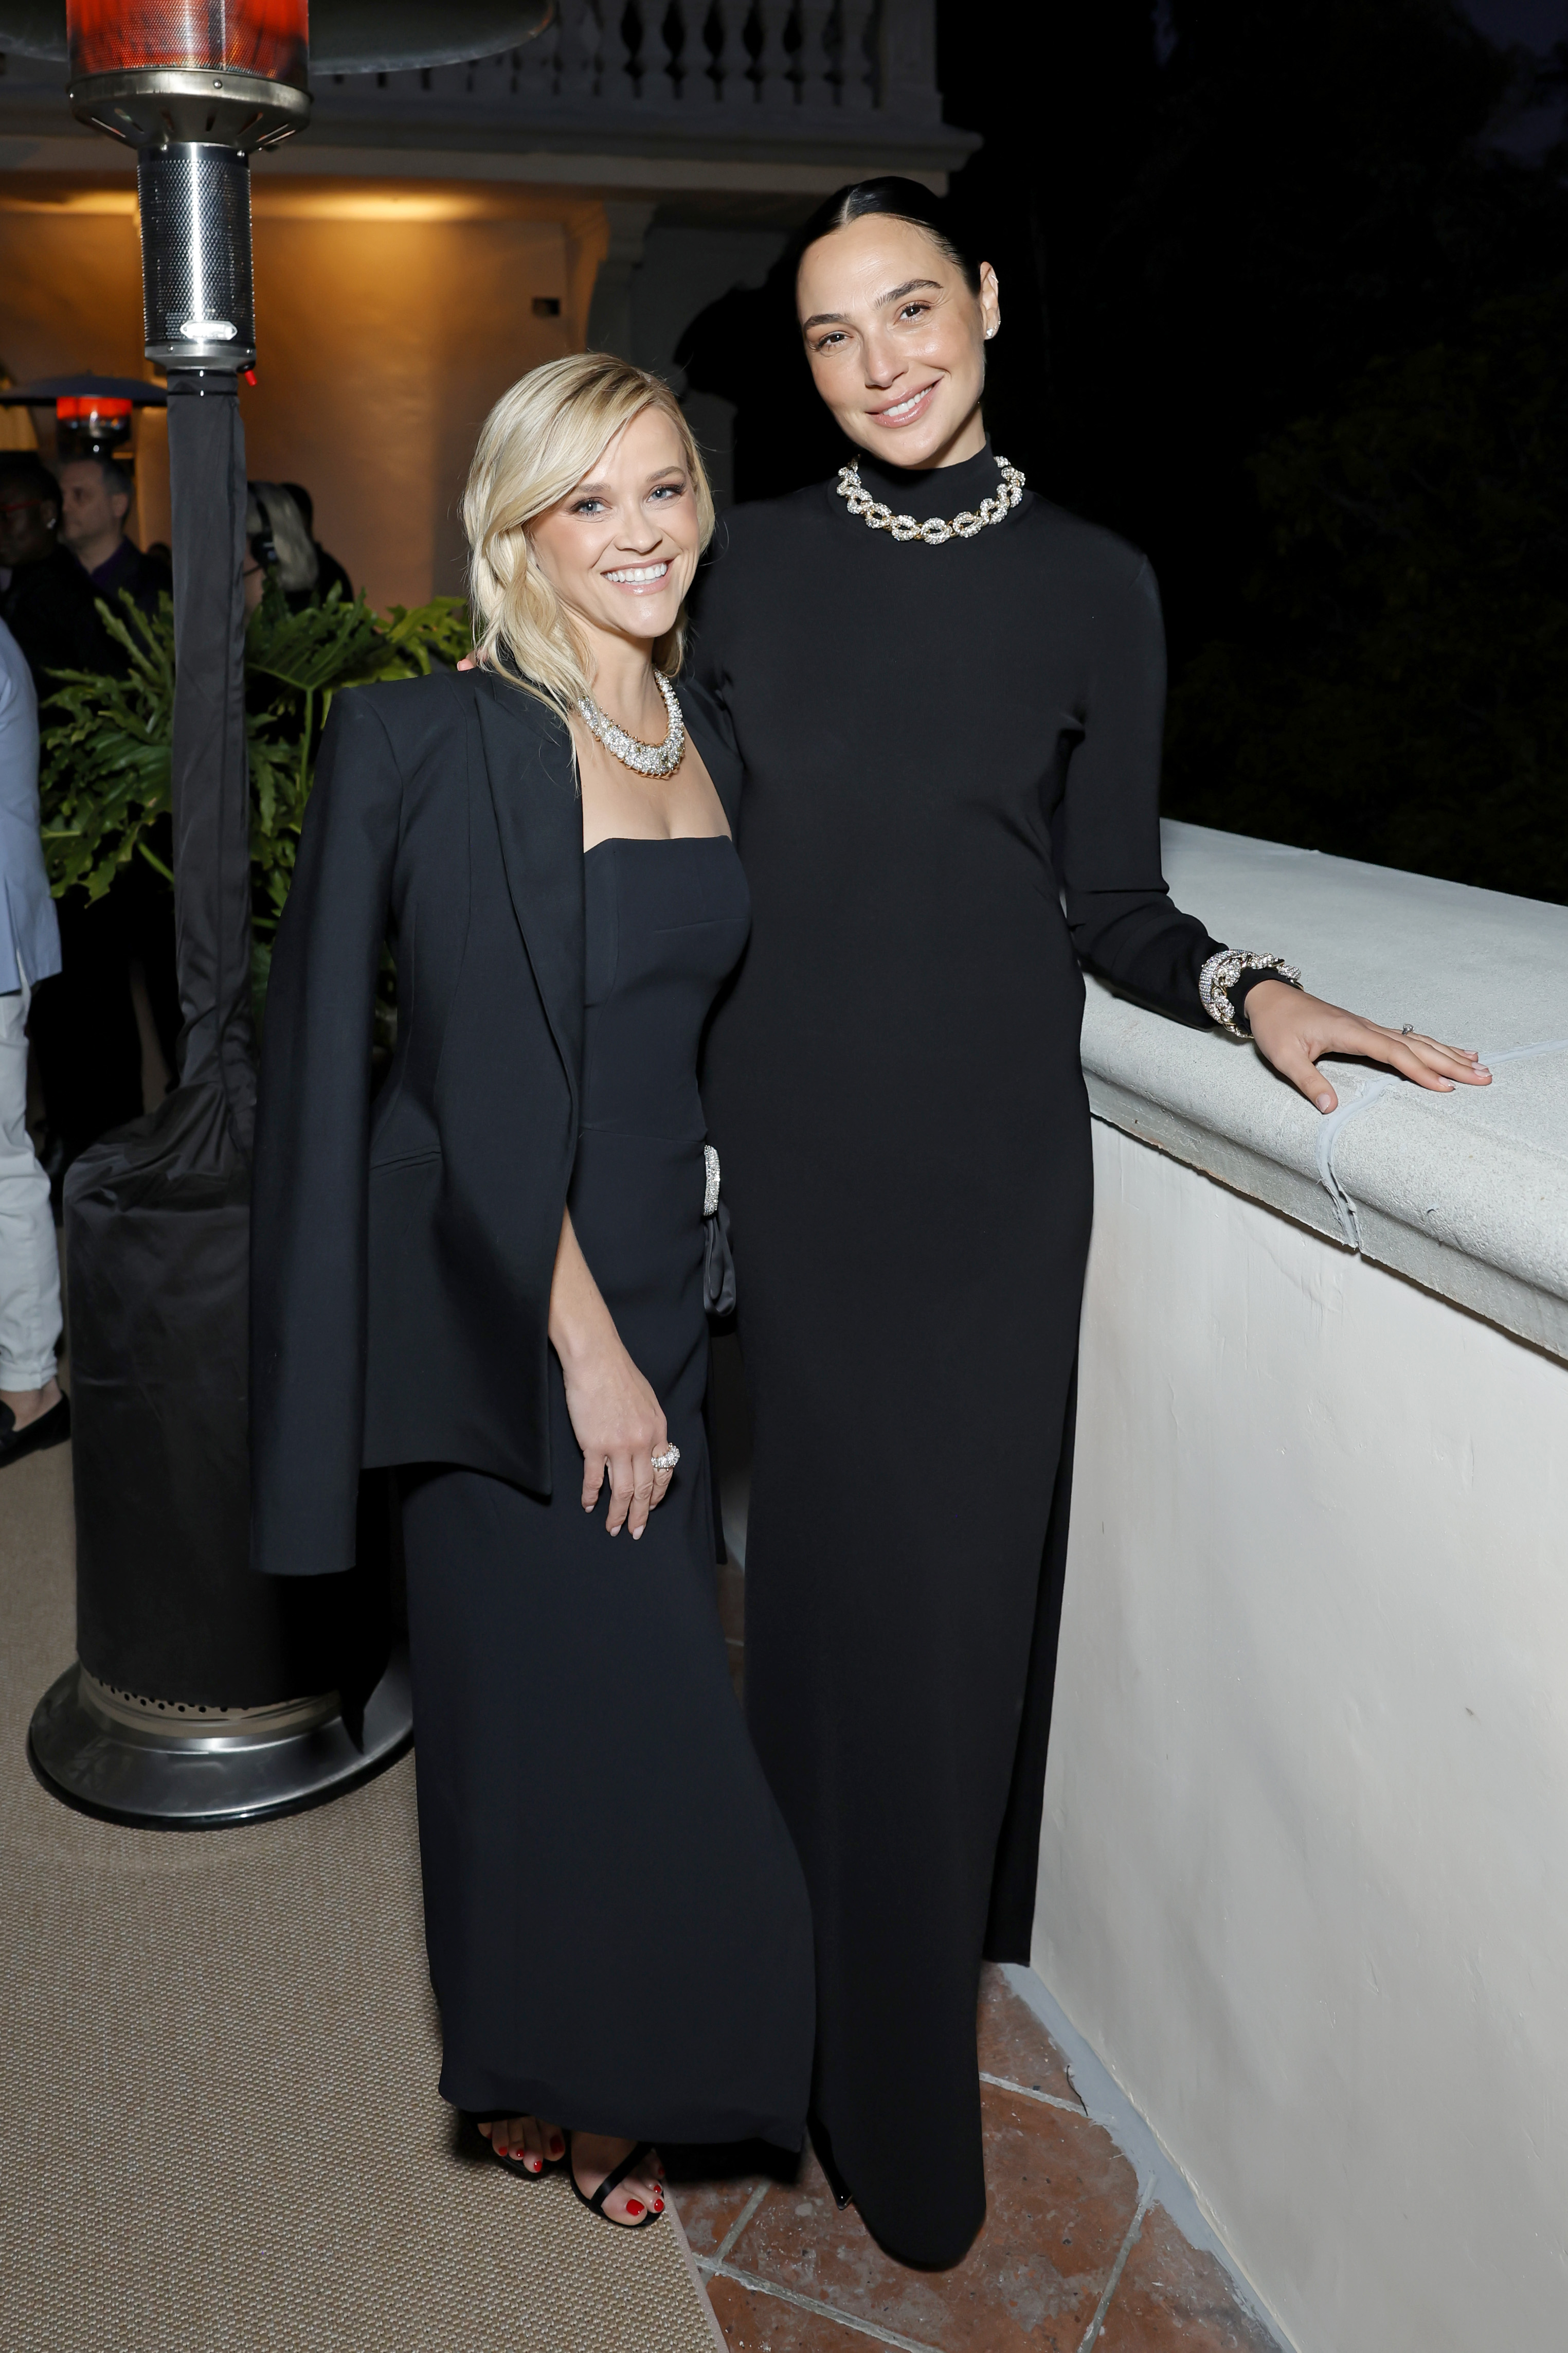 Reese smiled at the camera as she posed with Gal Gadot at the Tiffany & Co. event